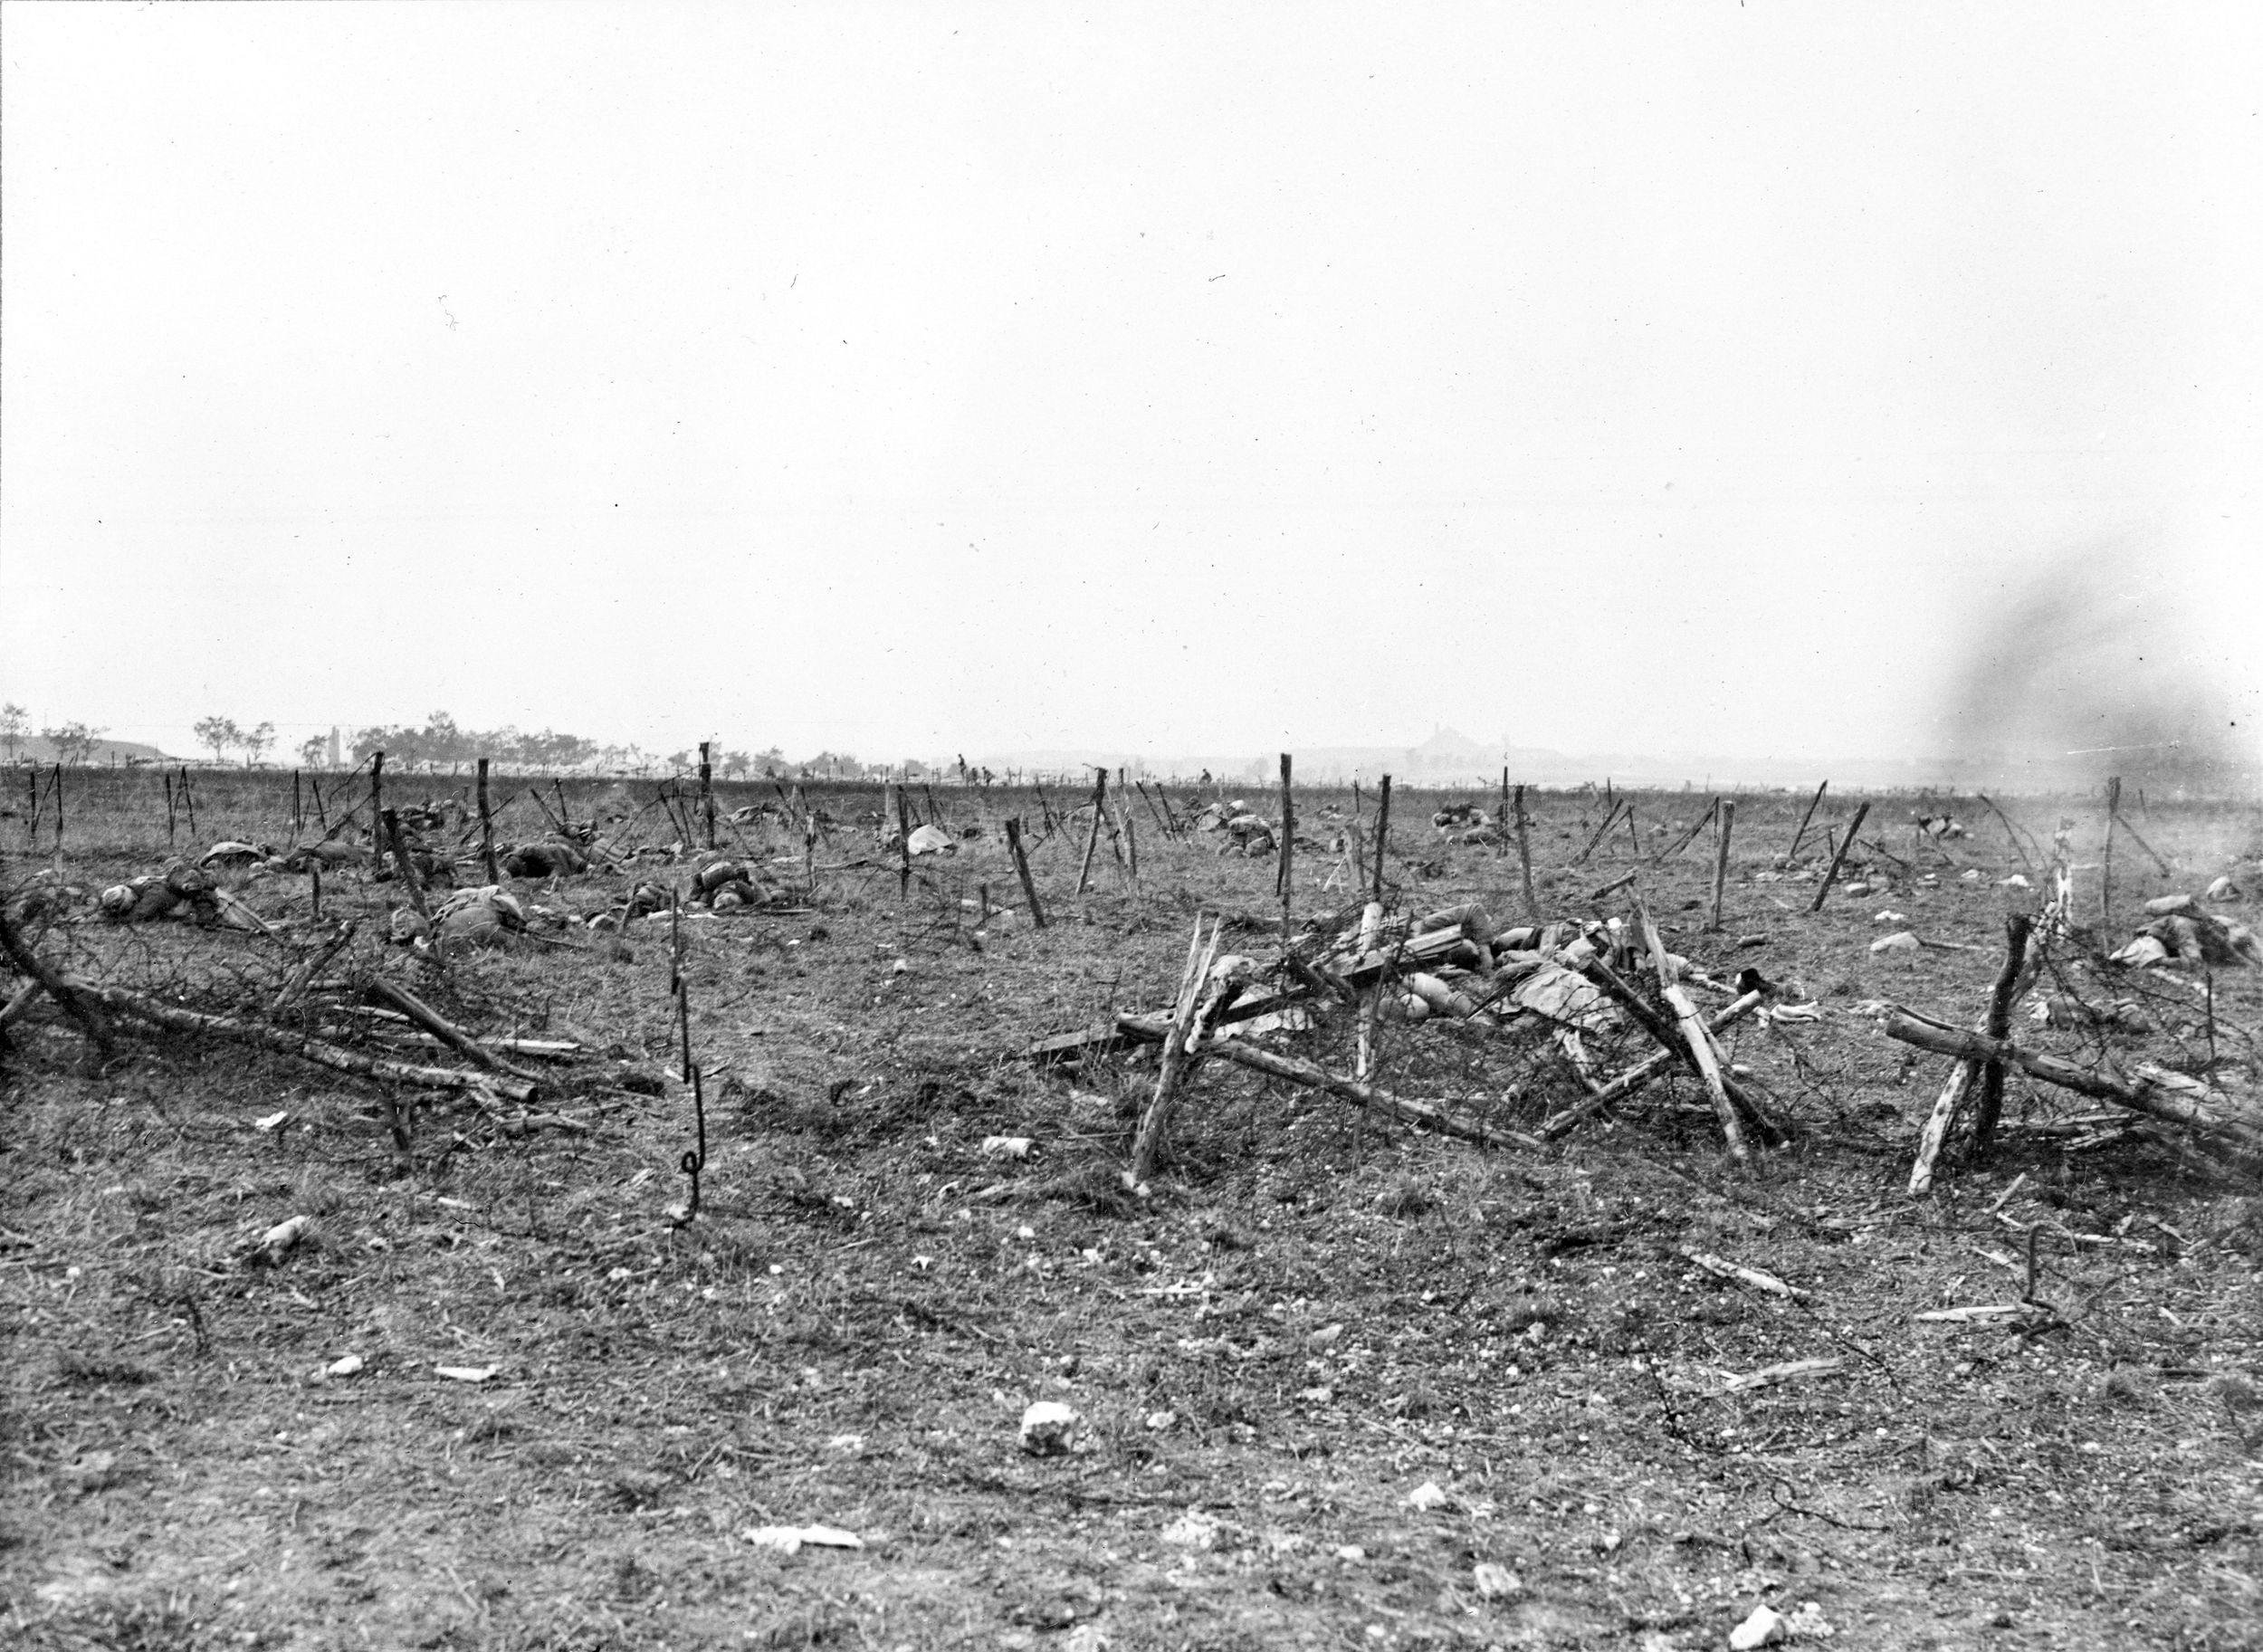 British dead near barbed wire defenses outside a captured German machine-gun emplacement, near Loos, September 28, 1915. Britain lost about 20,000 soldiers during three days of fighting.